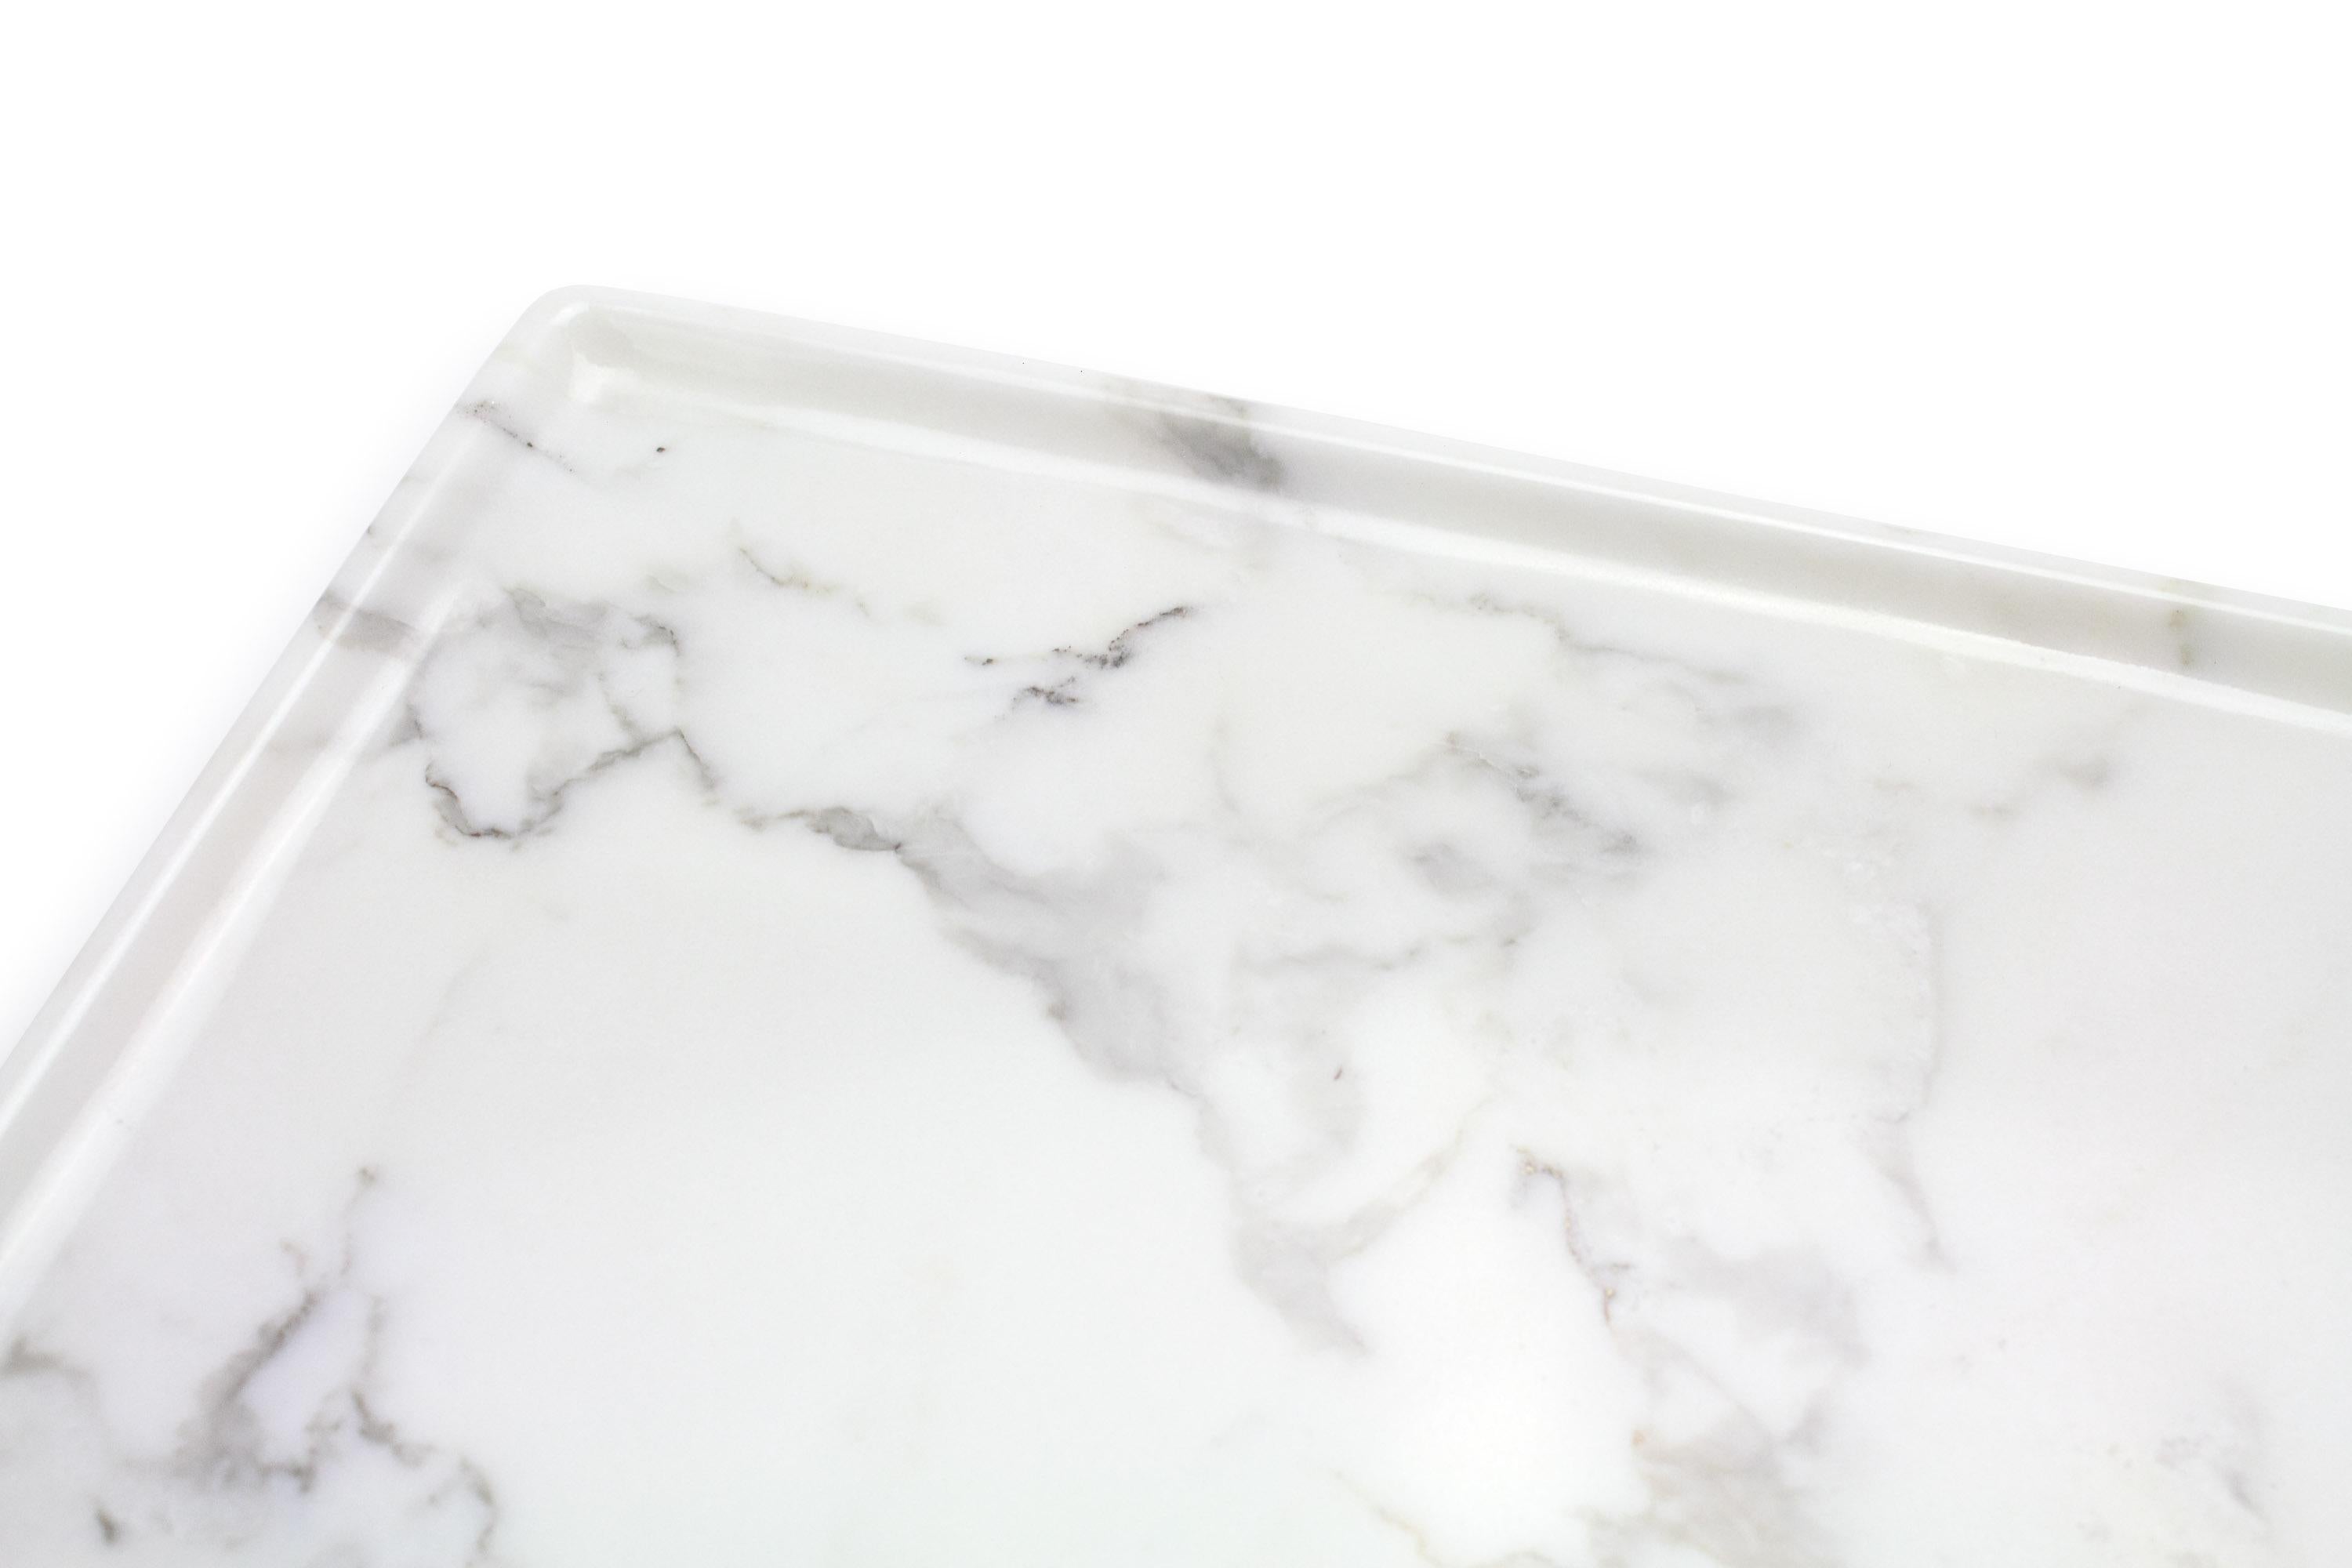 Italian Tray Hand Carved from Solid Block of White Marble, Rectangular, Made in Italy